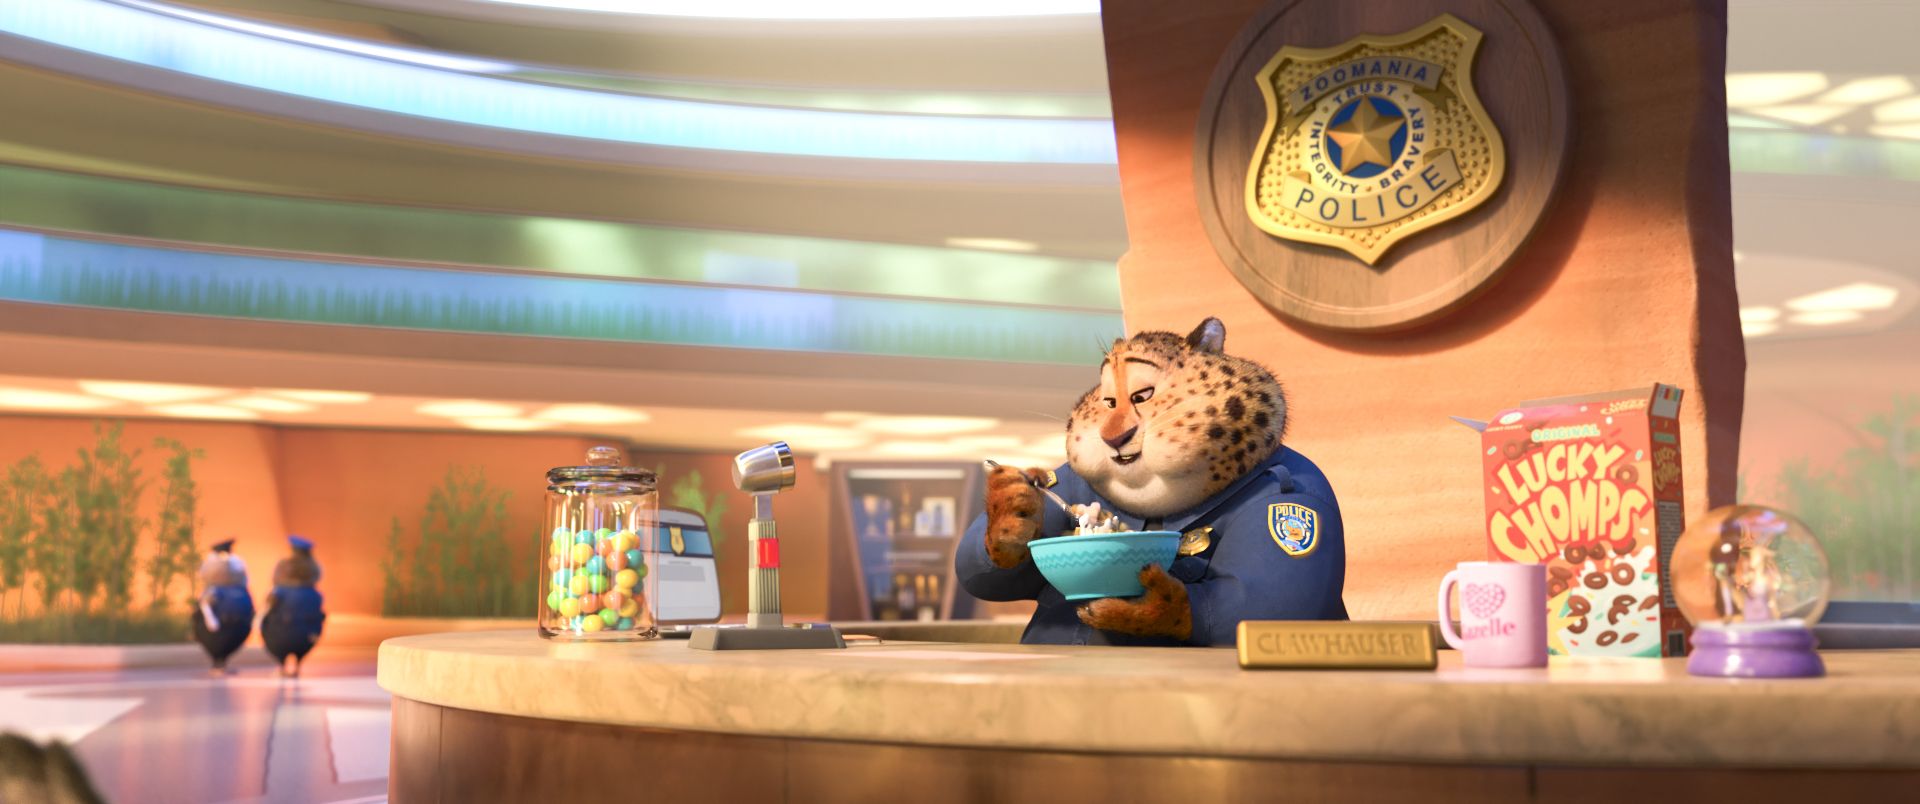 zootopia-easter-eggs-mickey-mouse-cereal-highlighted